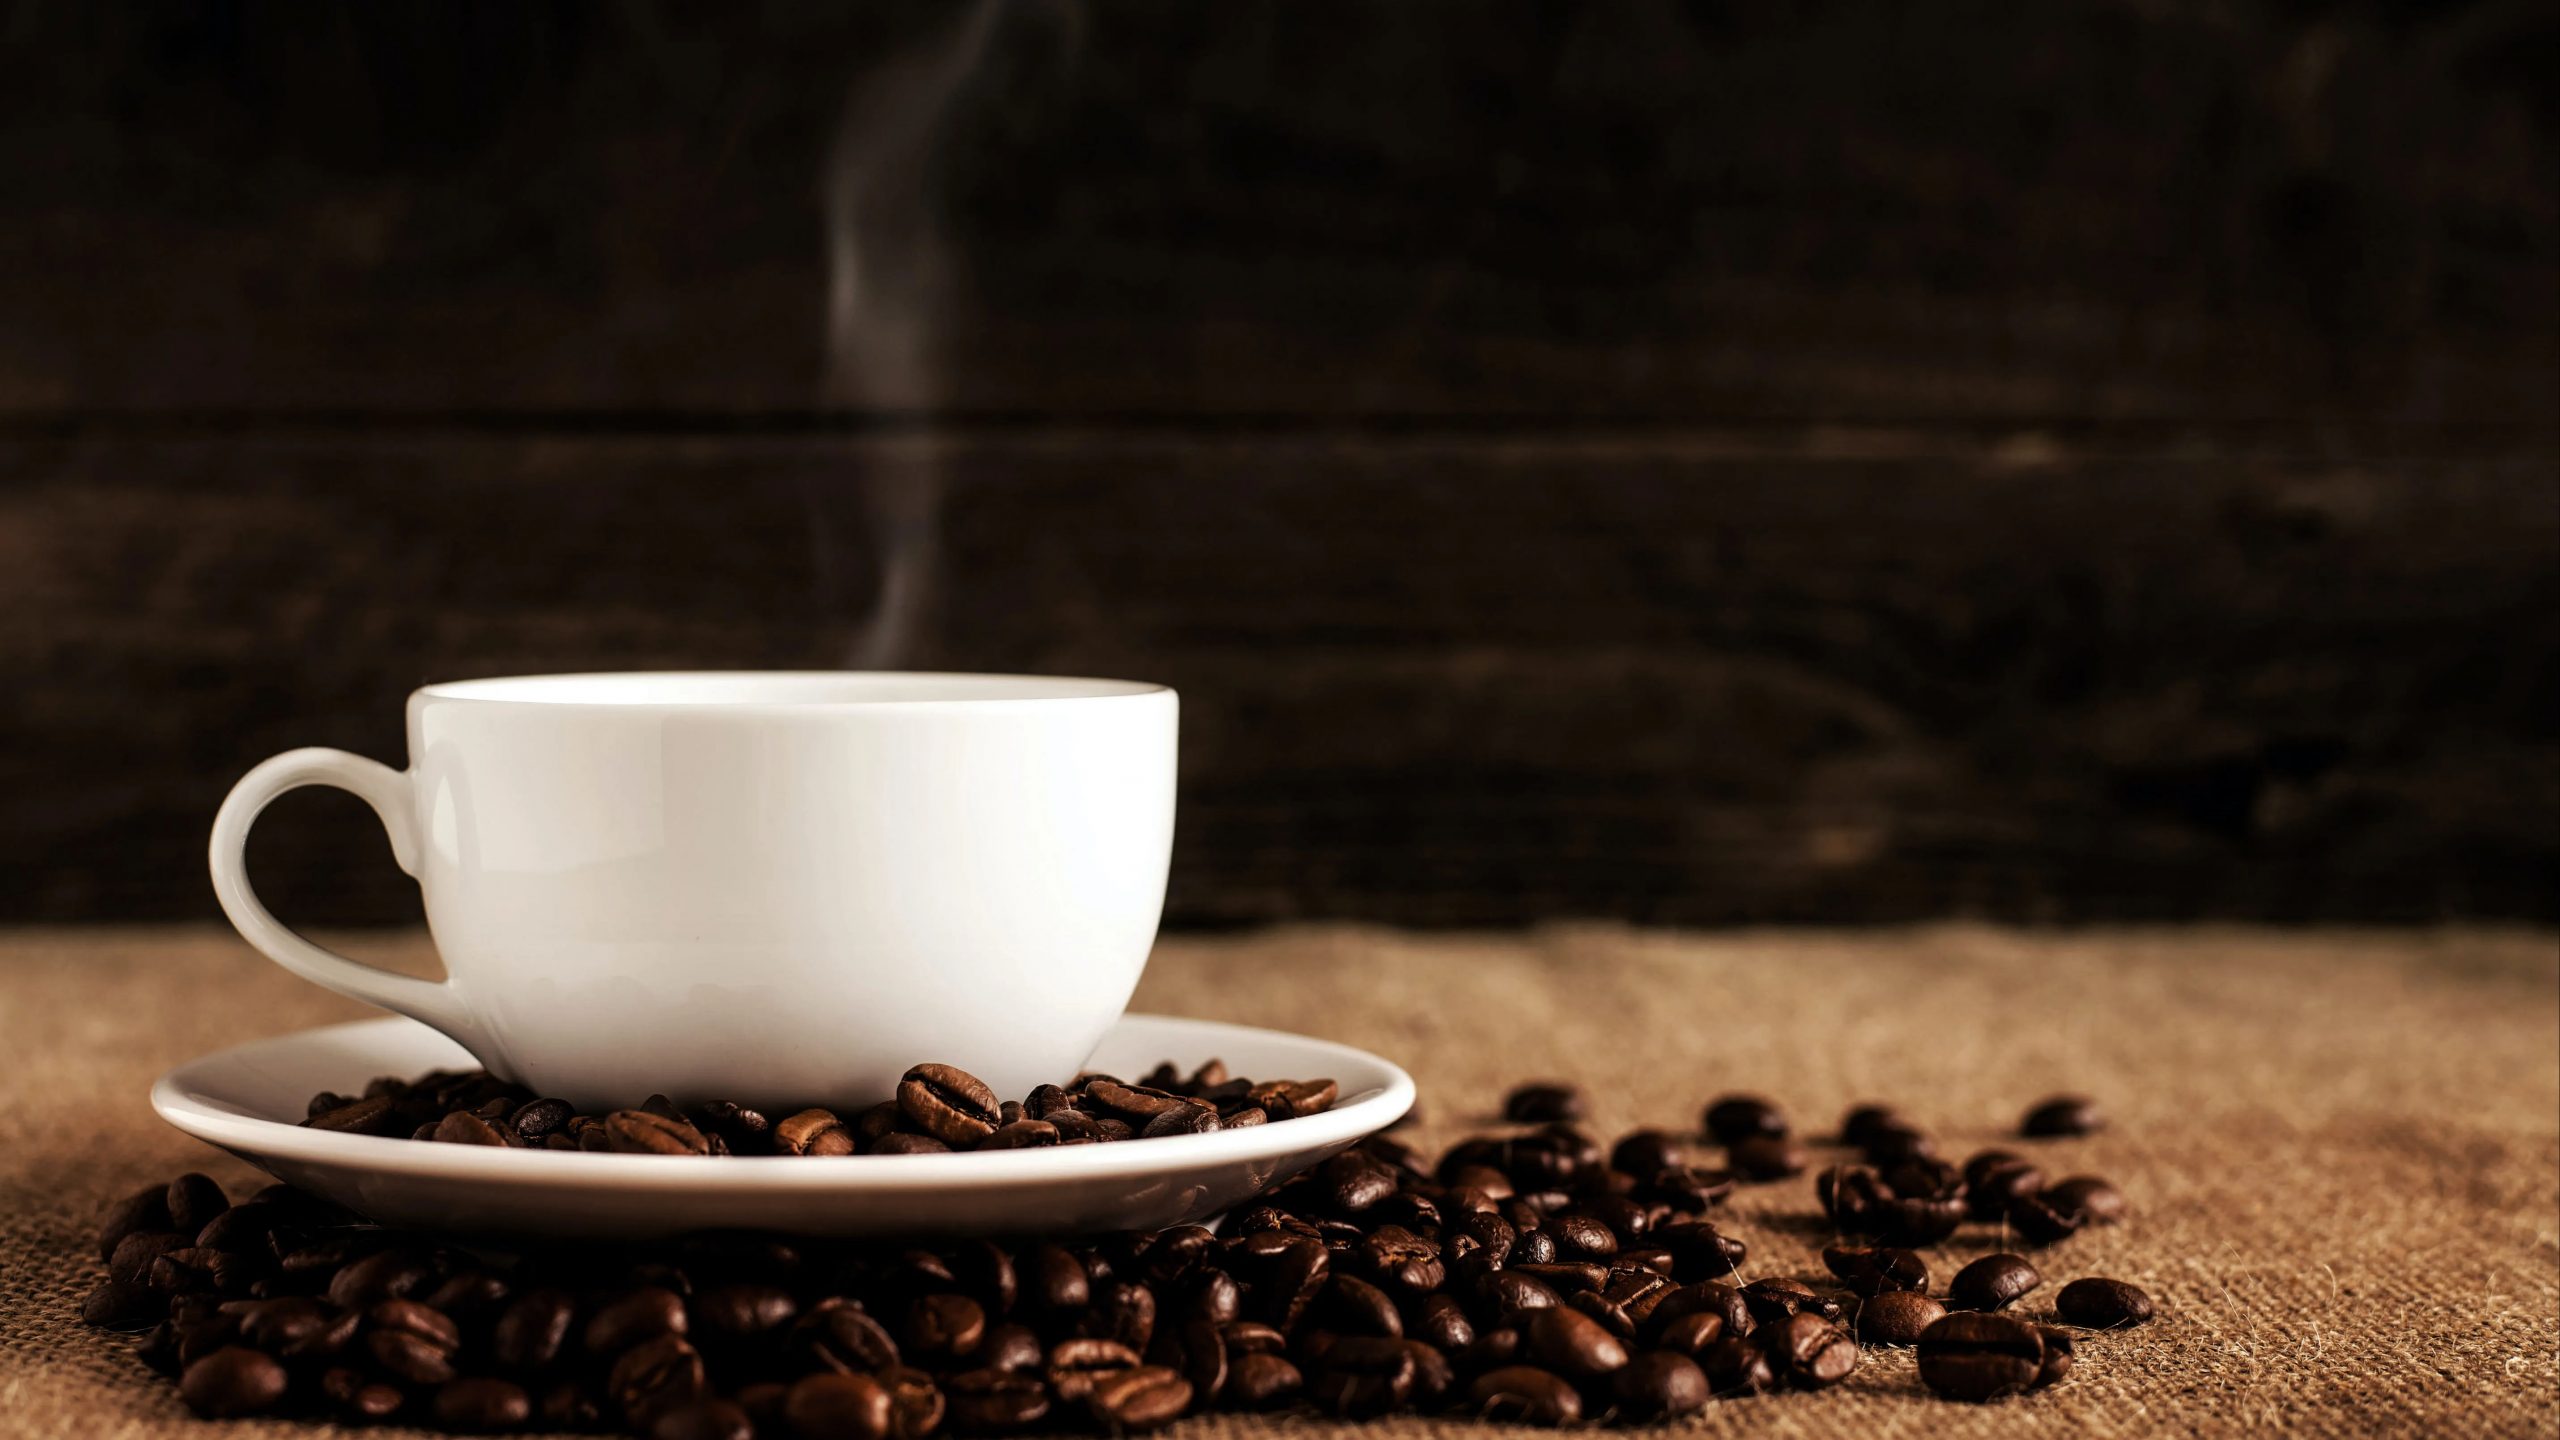 6 common myths about caffeine that you should stop believing